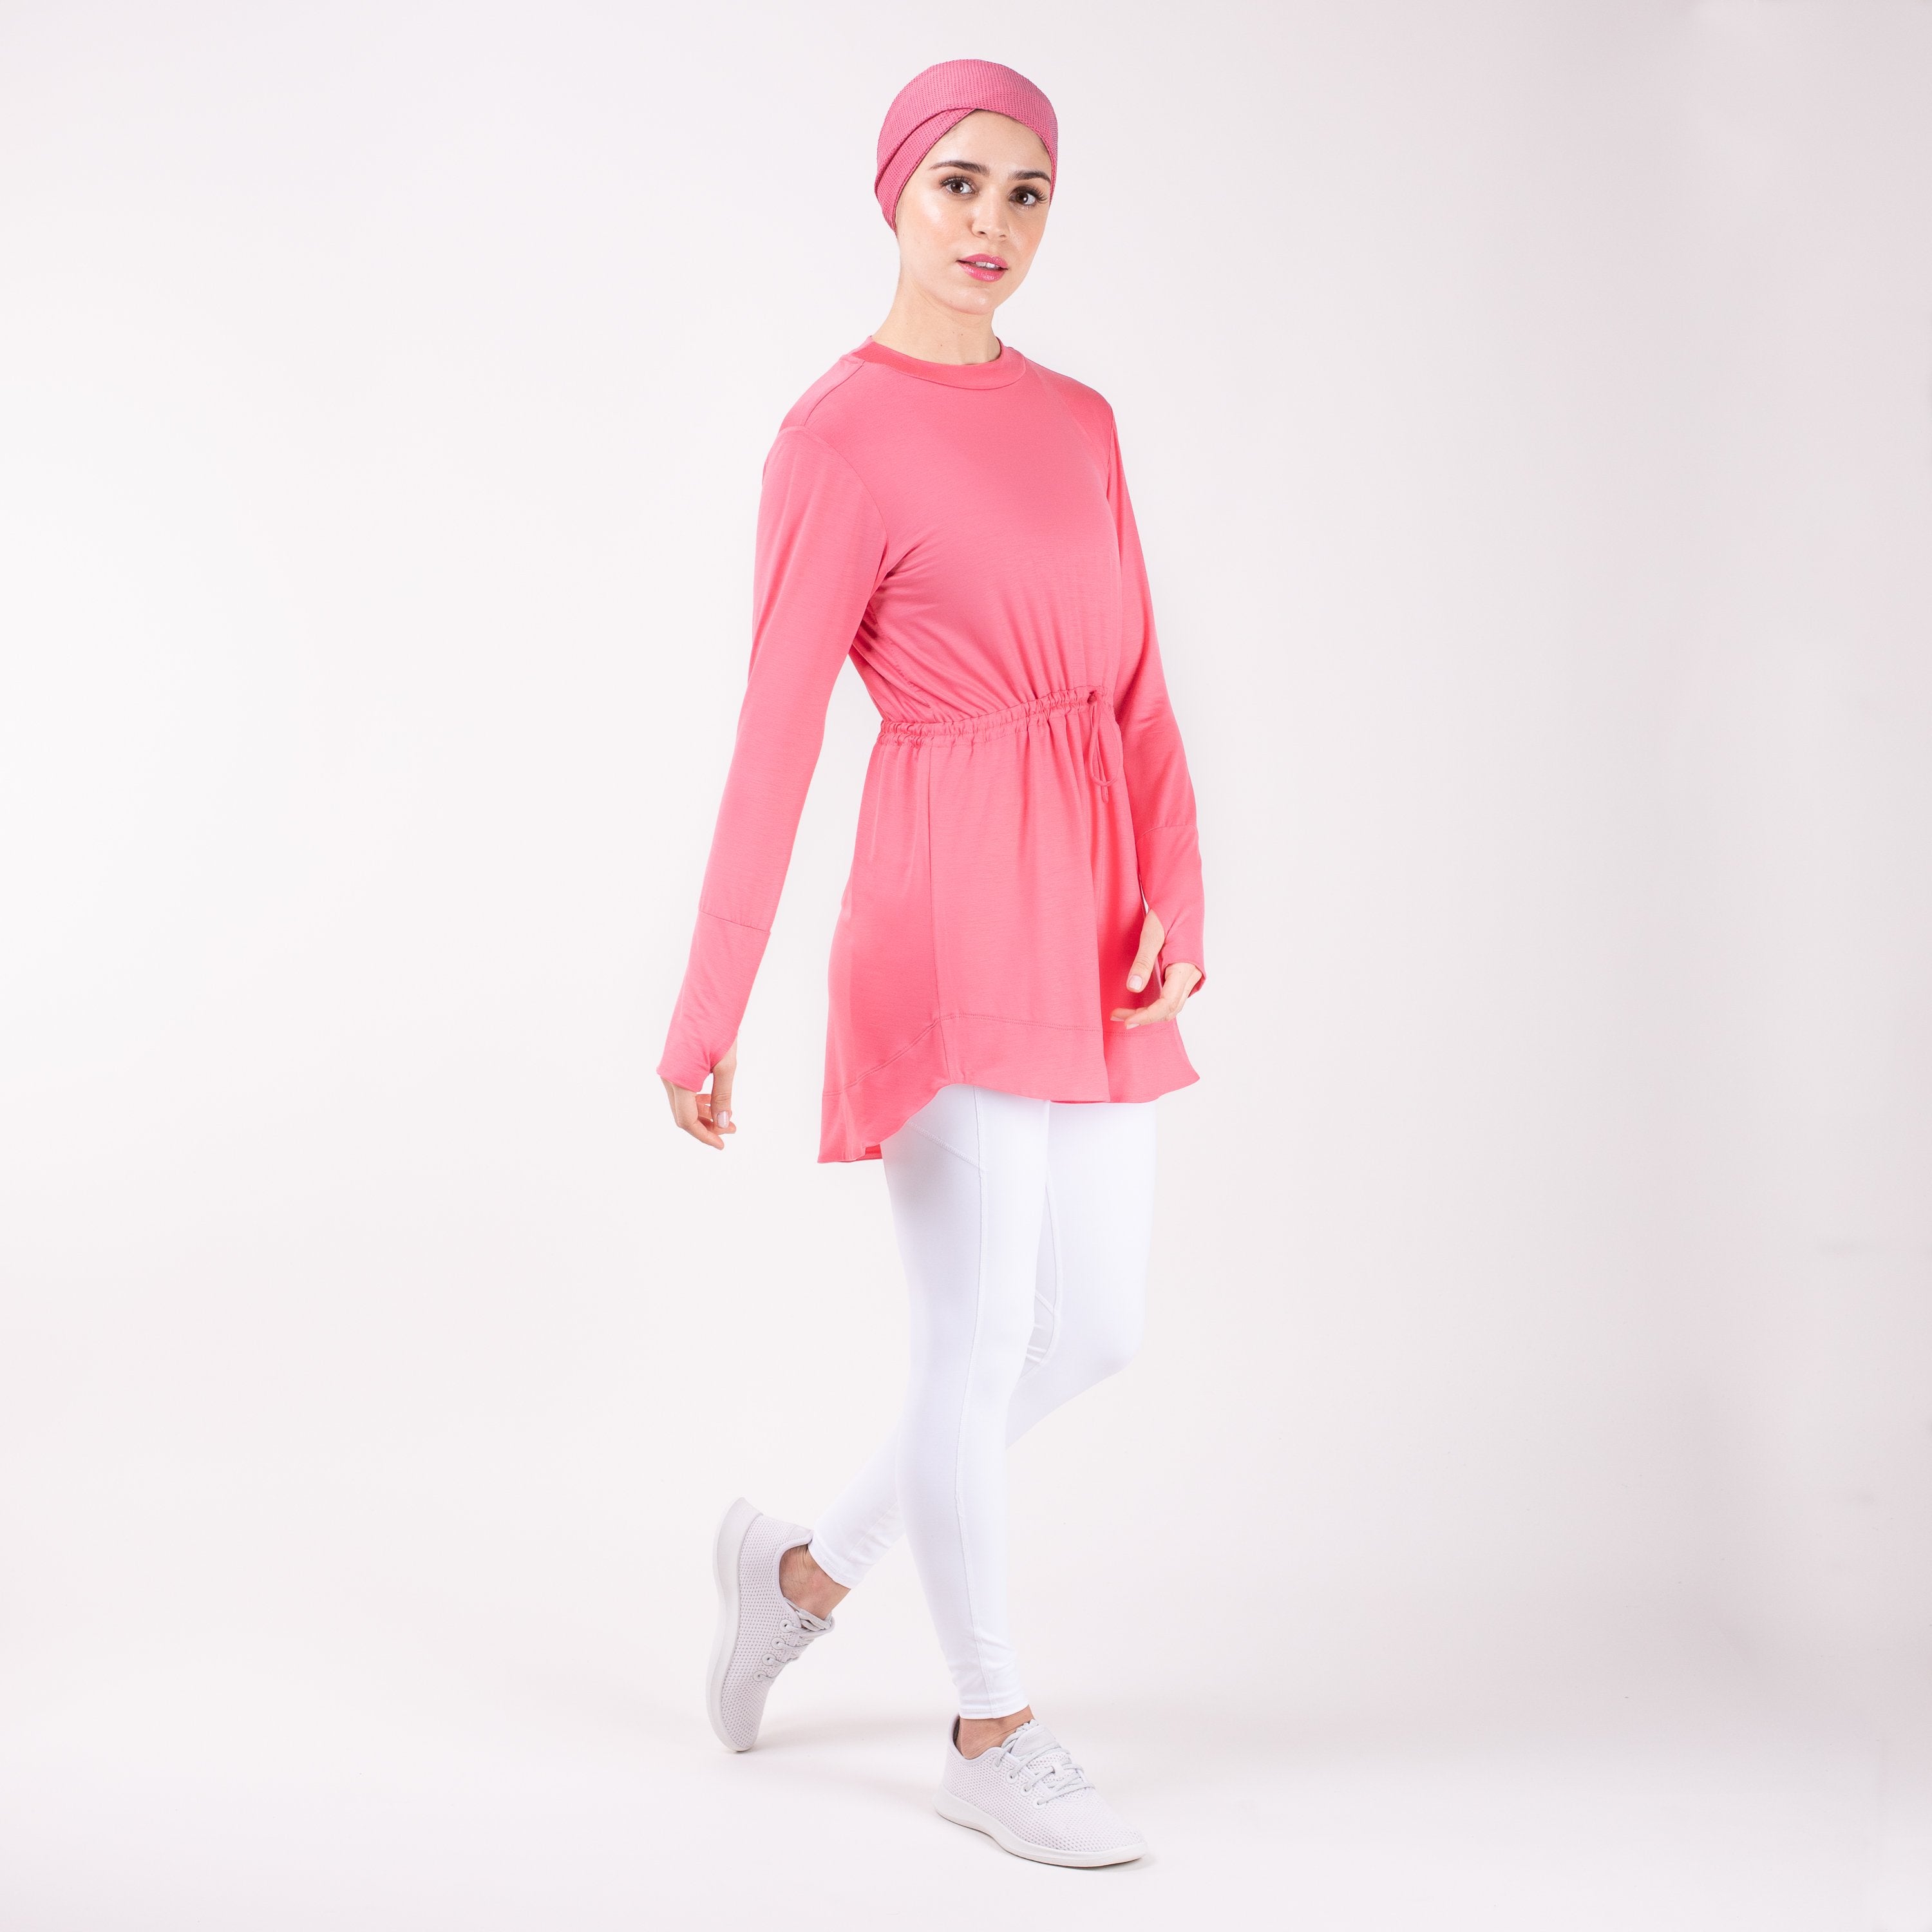 Woman walking to the right wearing the modest, berry pink HAWA drawstring tee shirt and white leggings in front of a white back drop.